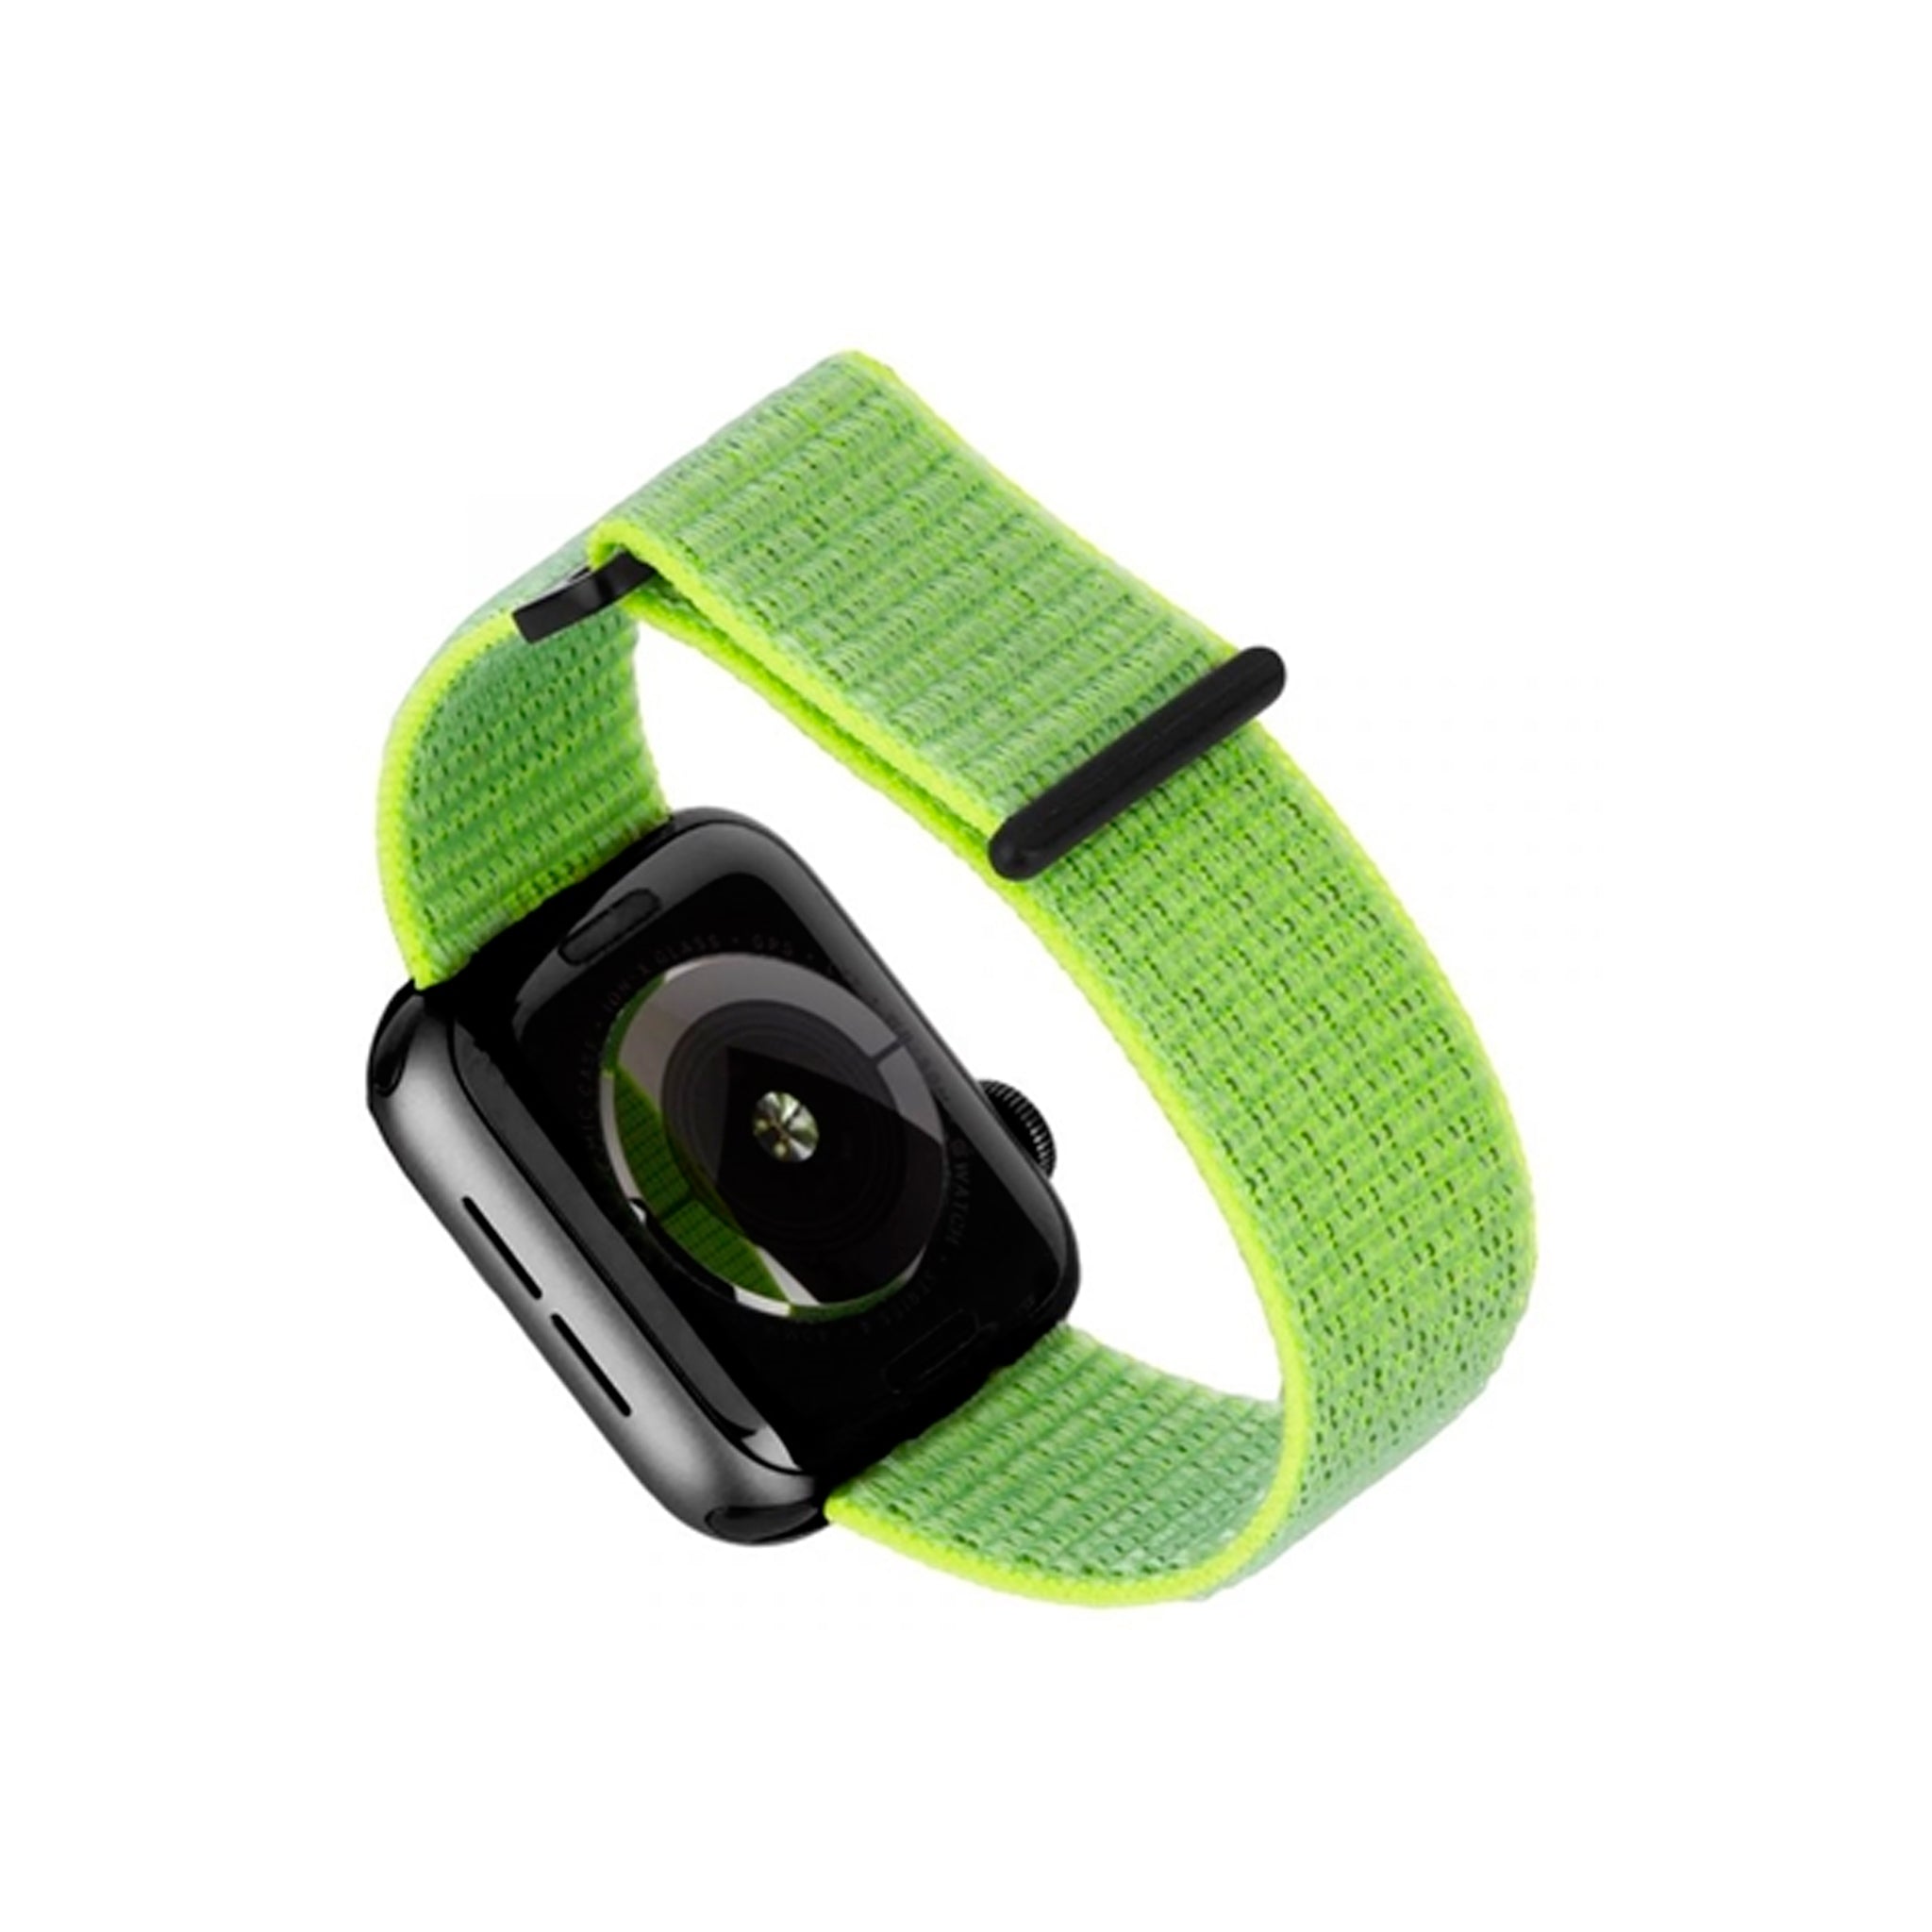 Case-mate - Nylon Watchband For Apple Watch 42mm / 44mm - Reflective Neon Green